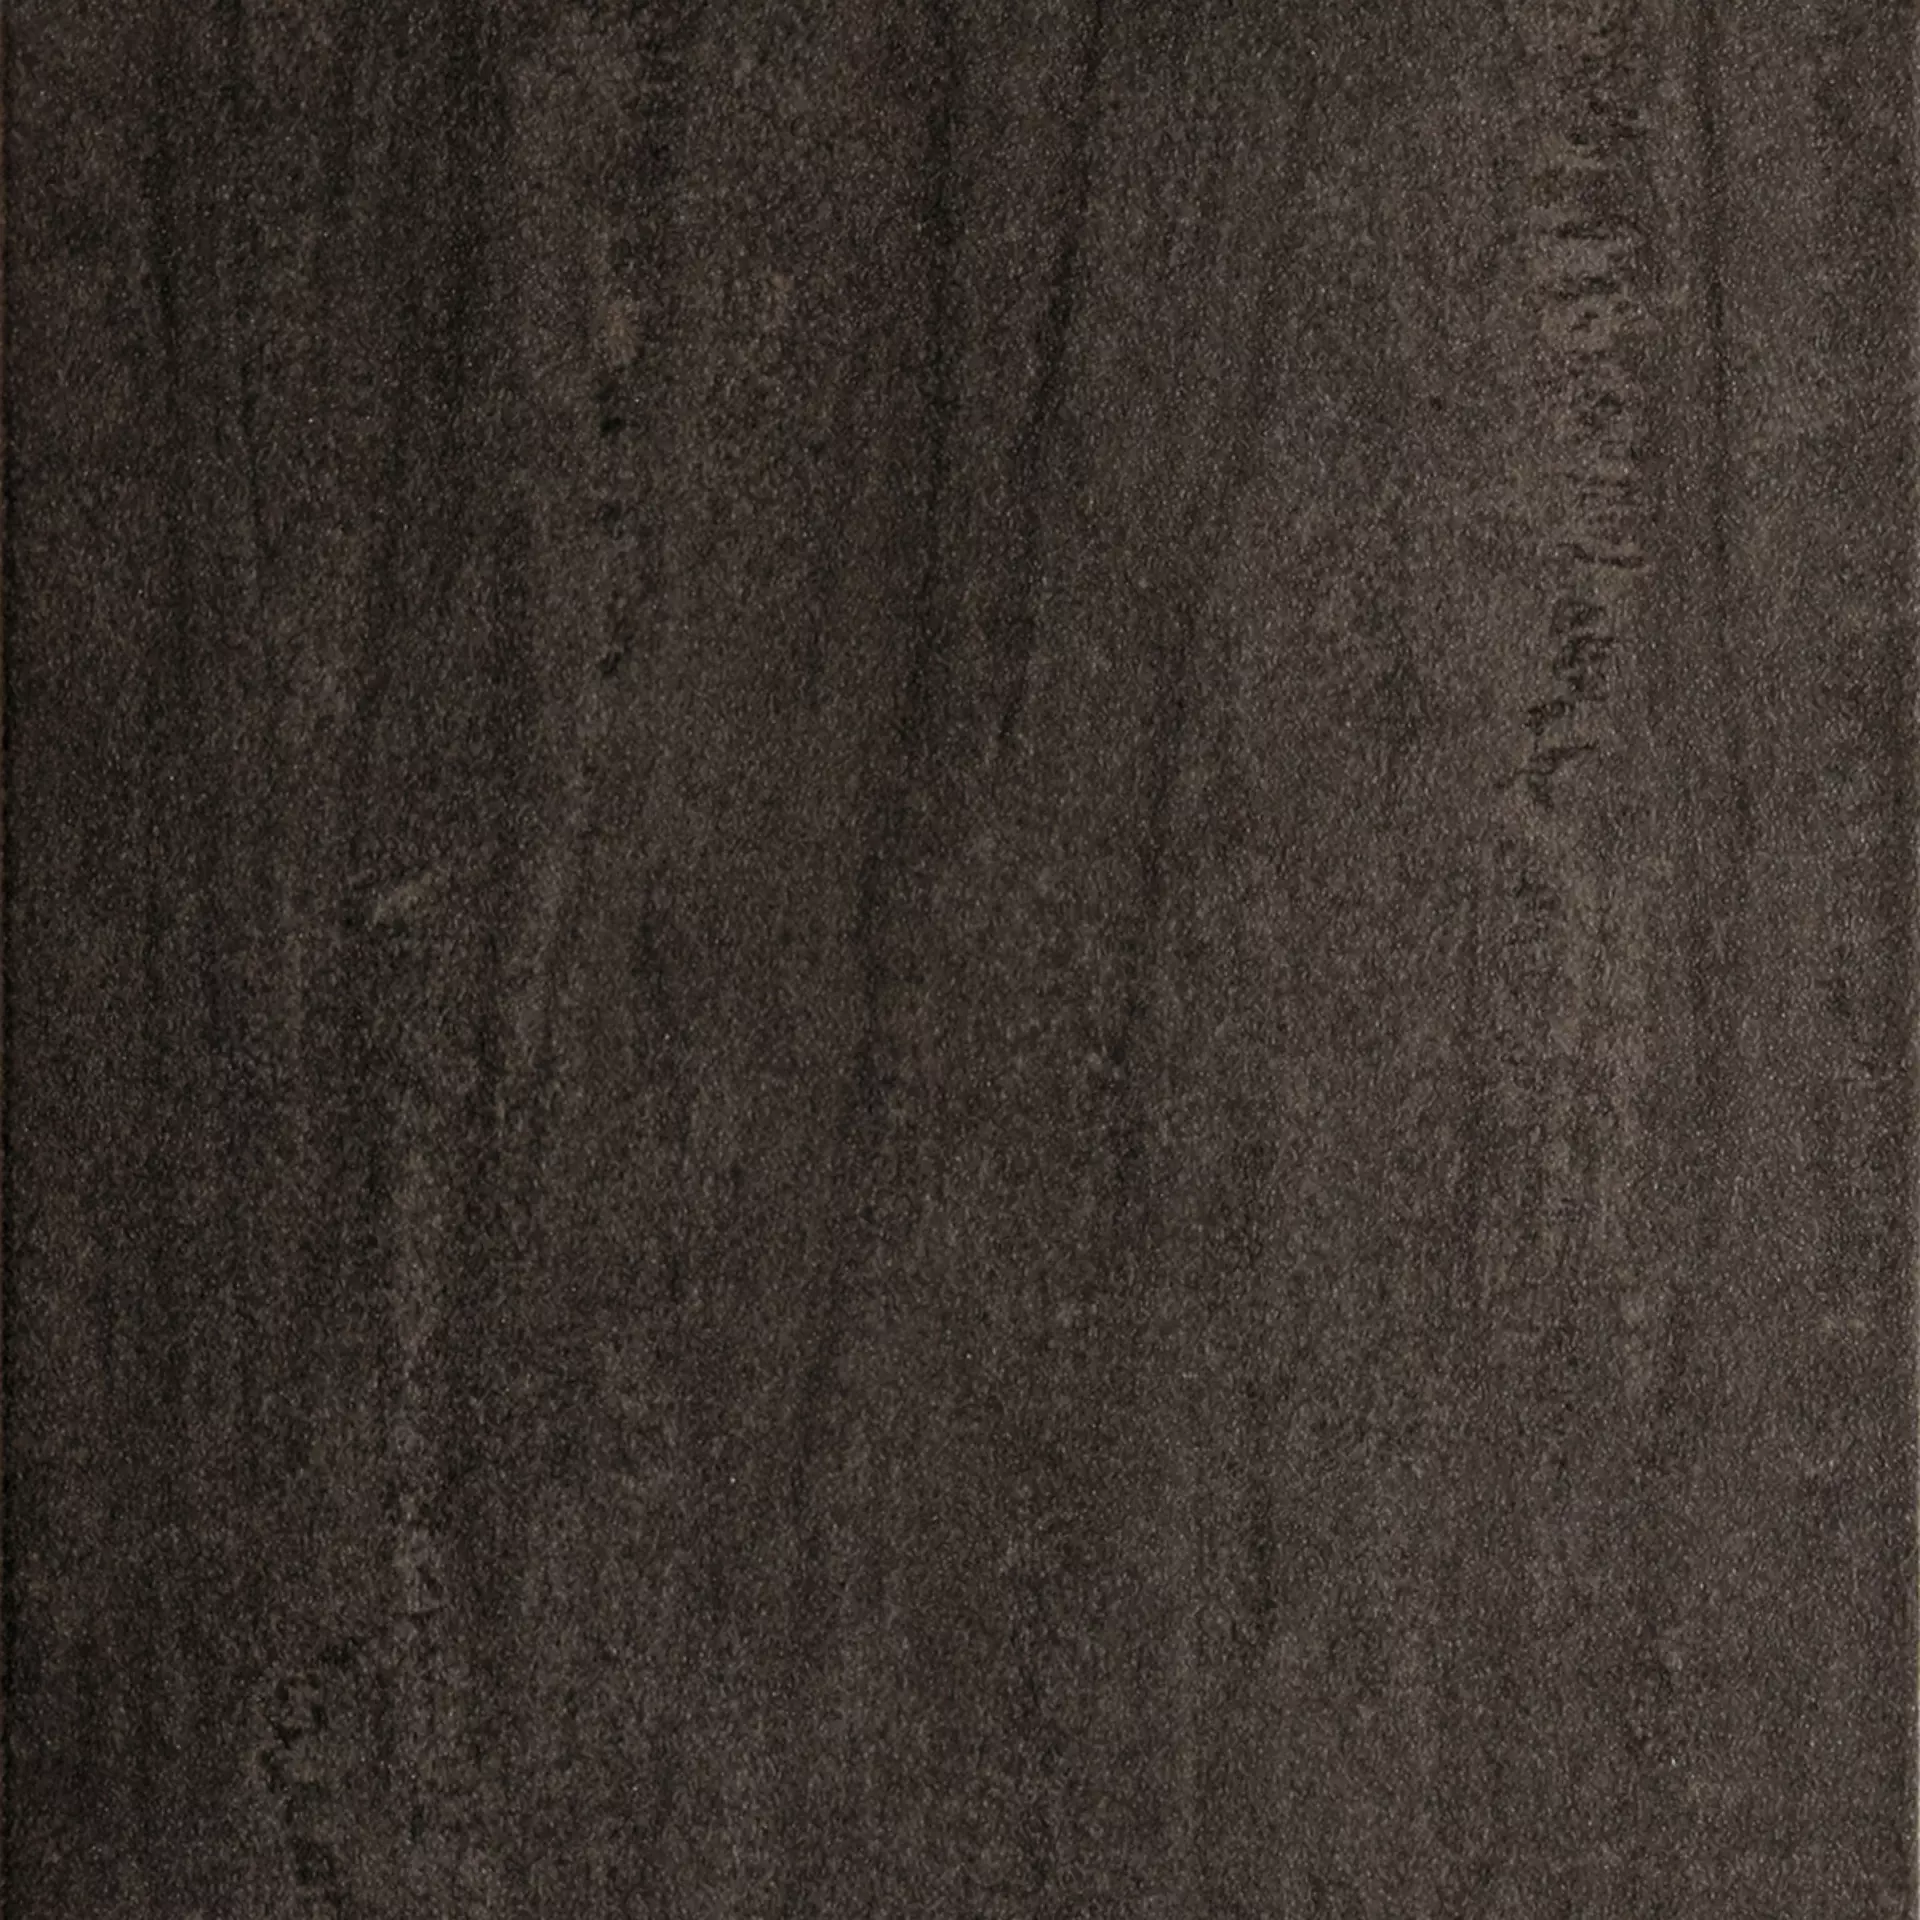 Rondine Contract Anthracite Lappato J84034 60x60cm rectified 9,5mm